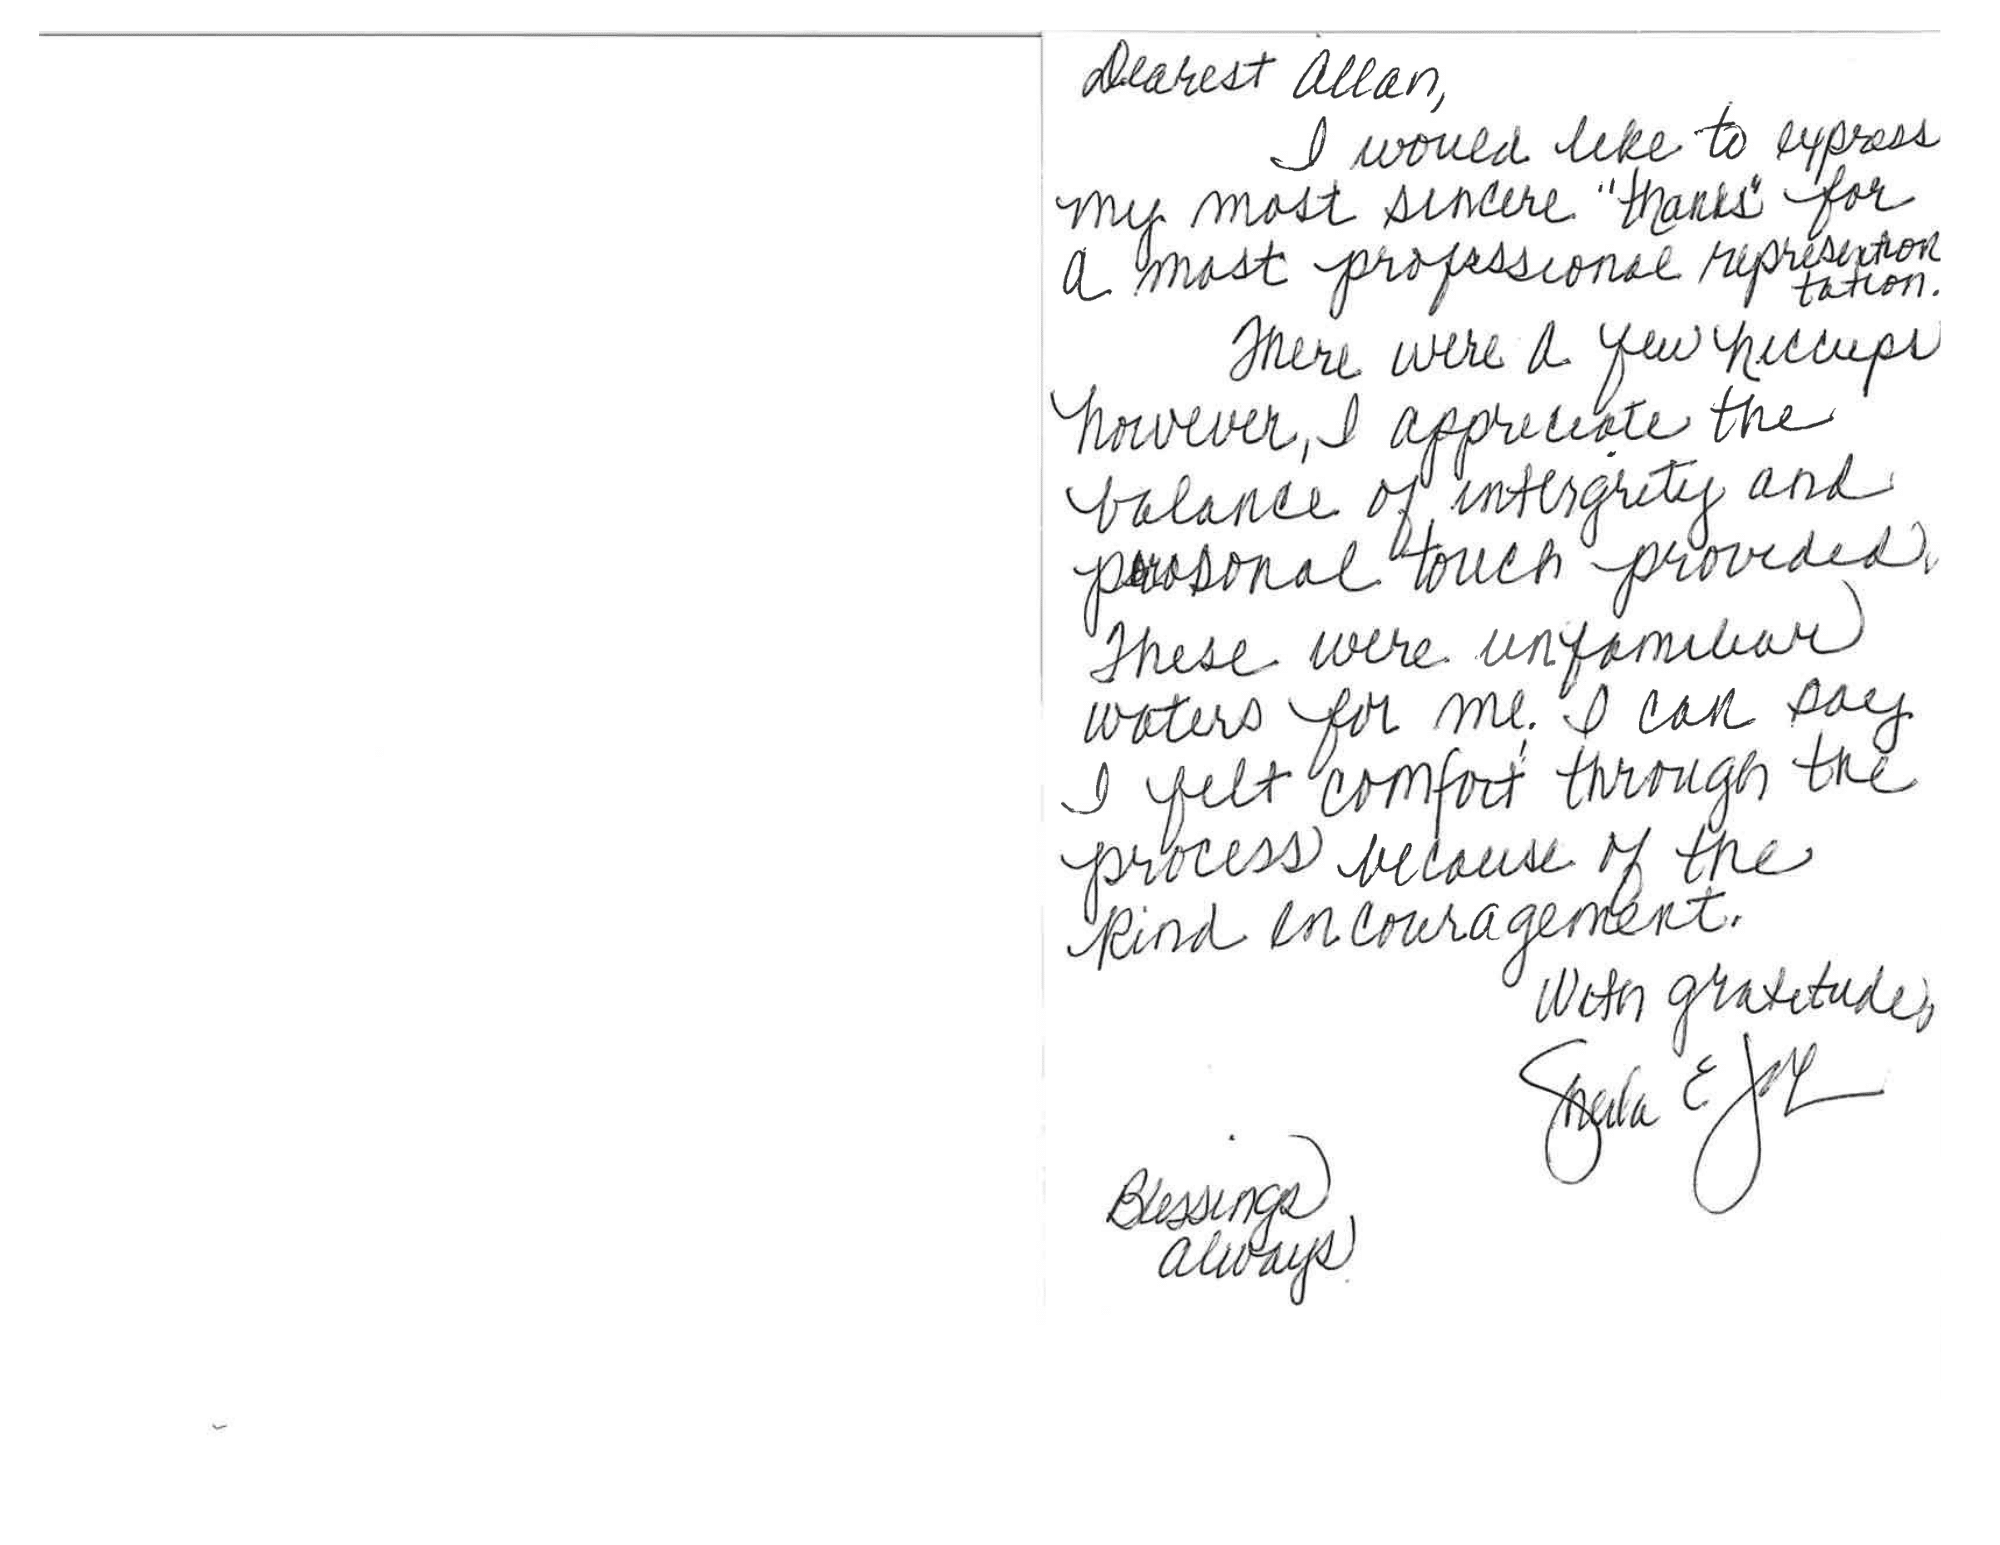 Client Testimonial for Allan - Page 2